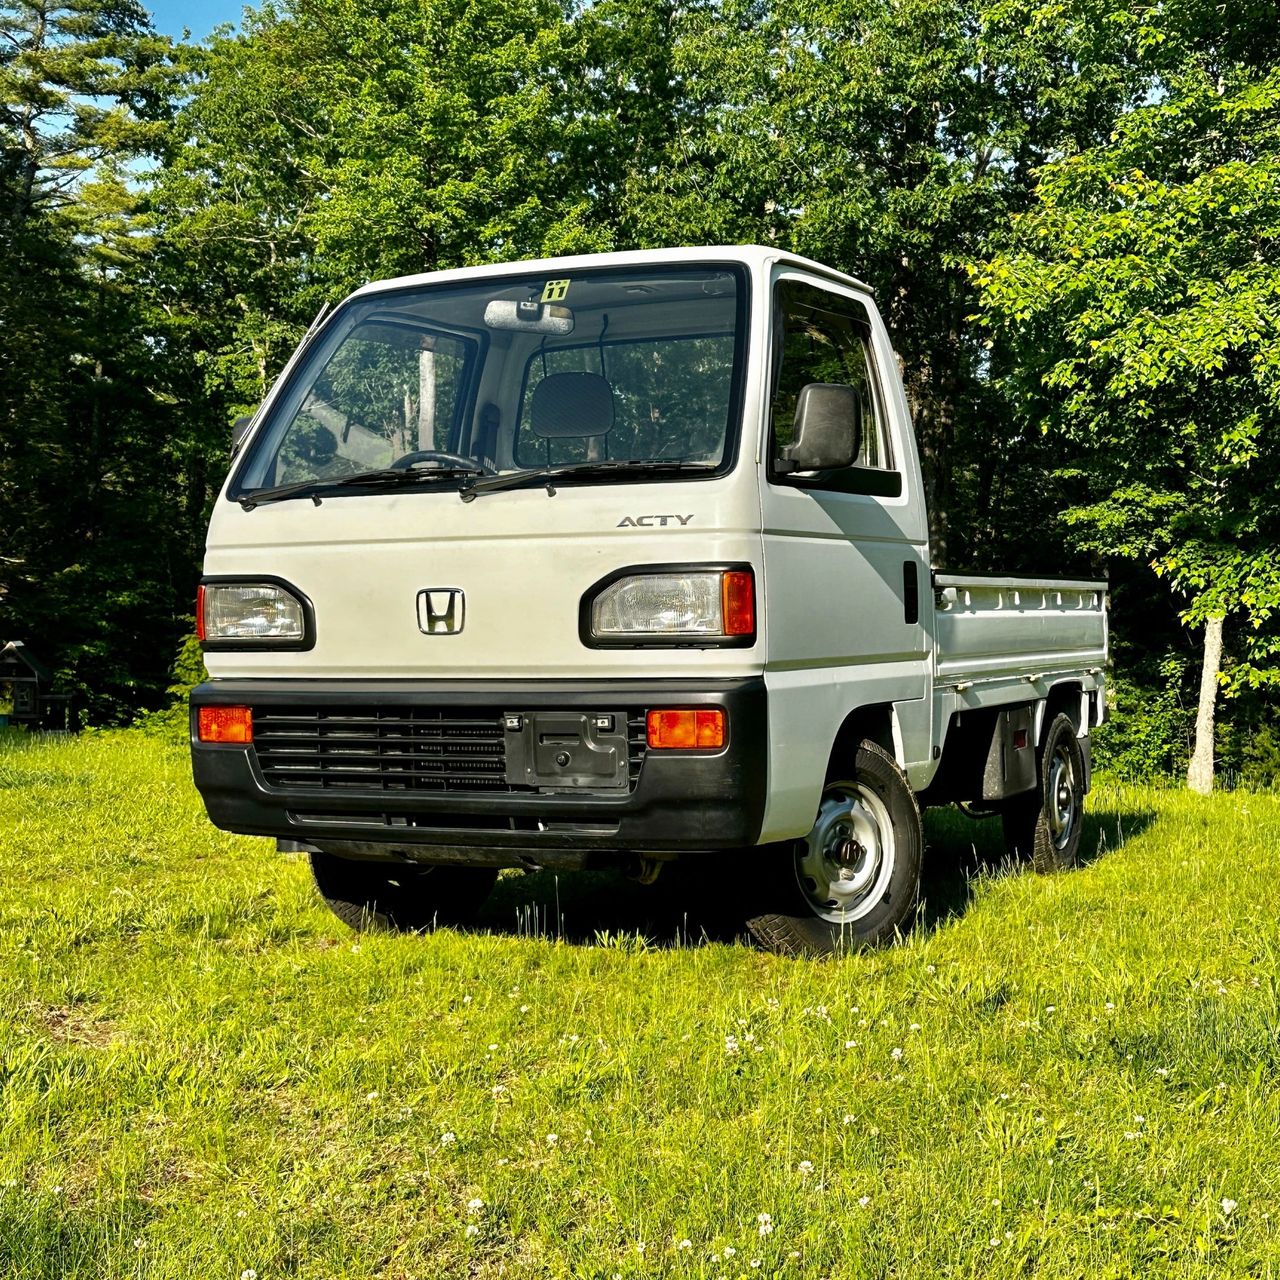 SHOP KEI TRUCKS FOR SALE TODAY AT OIWA                                                                                  CLICK PHOTO!